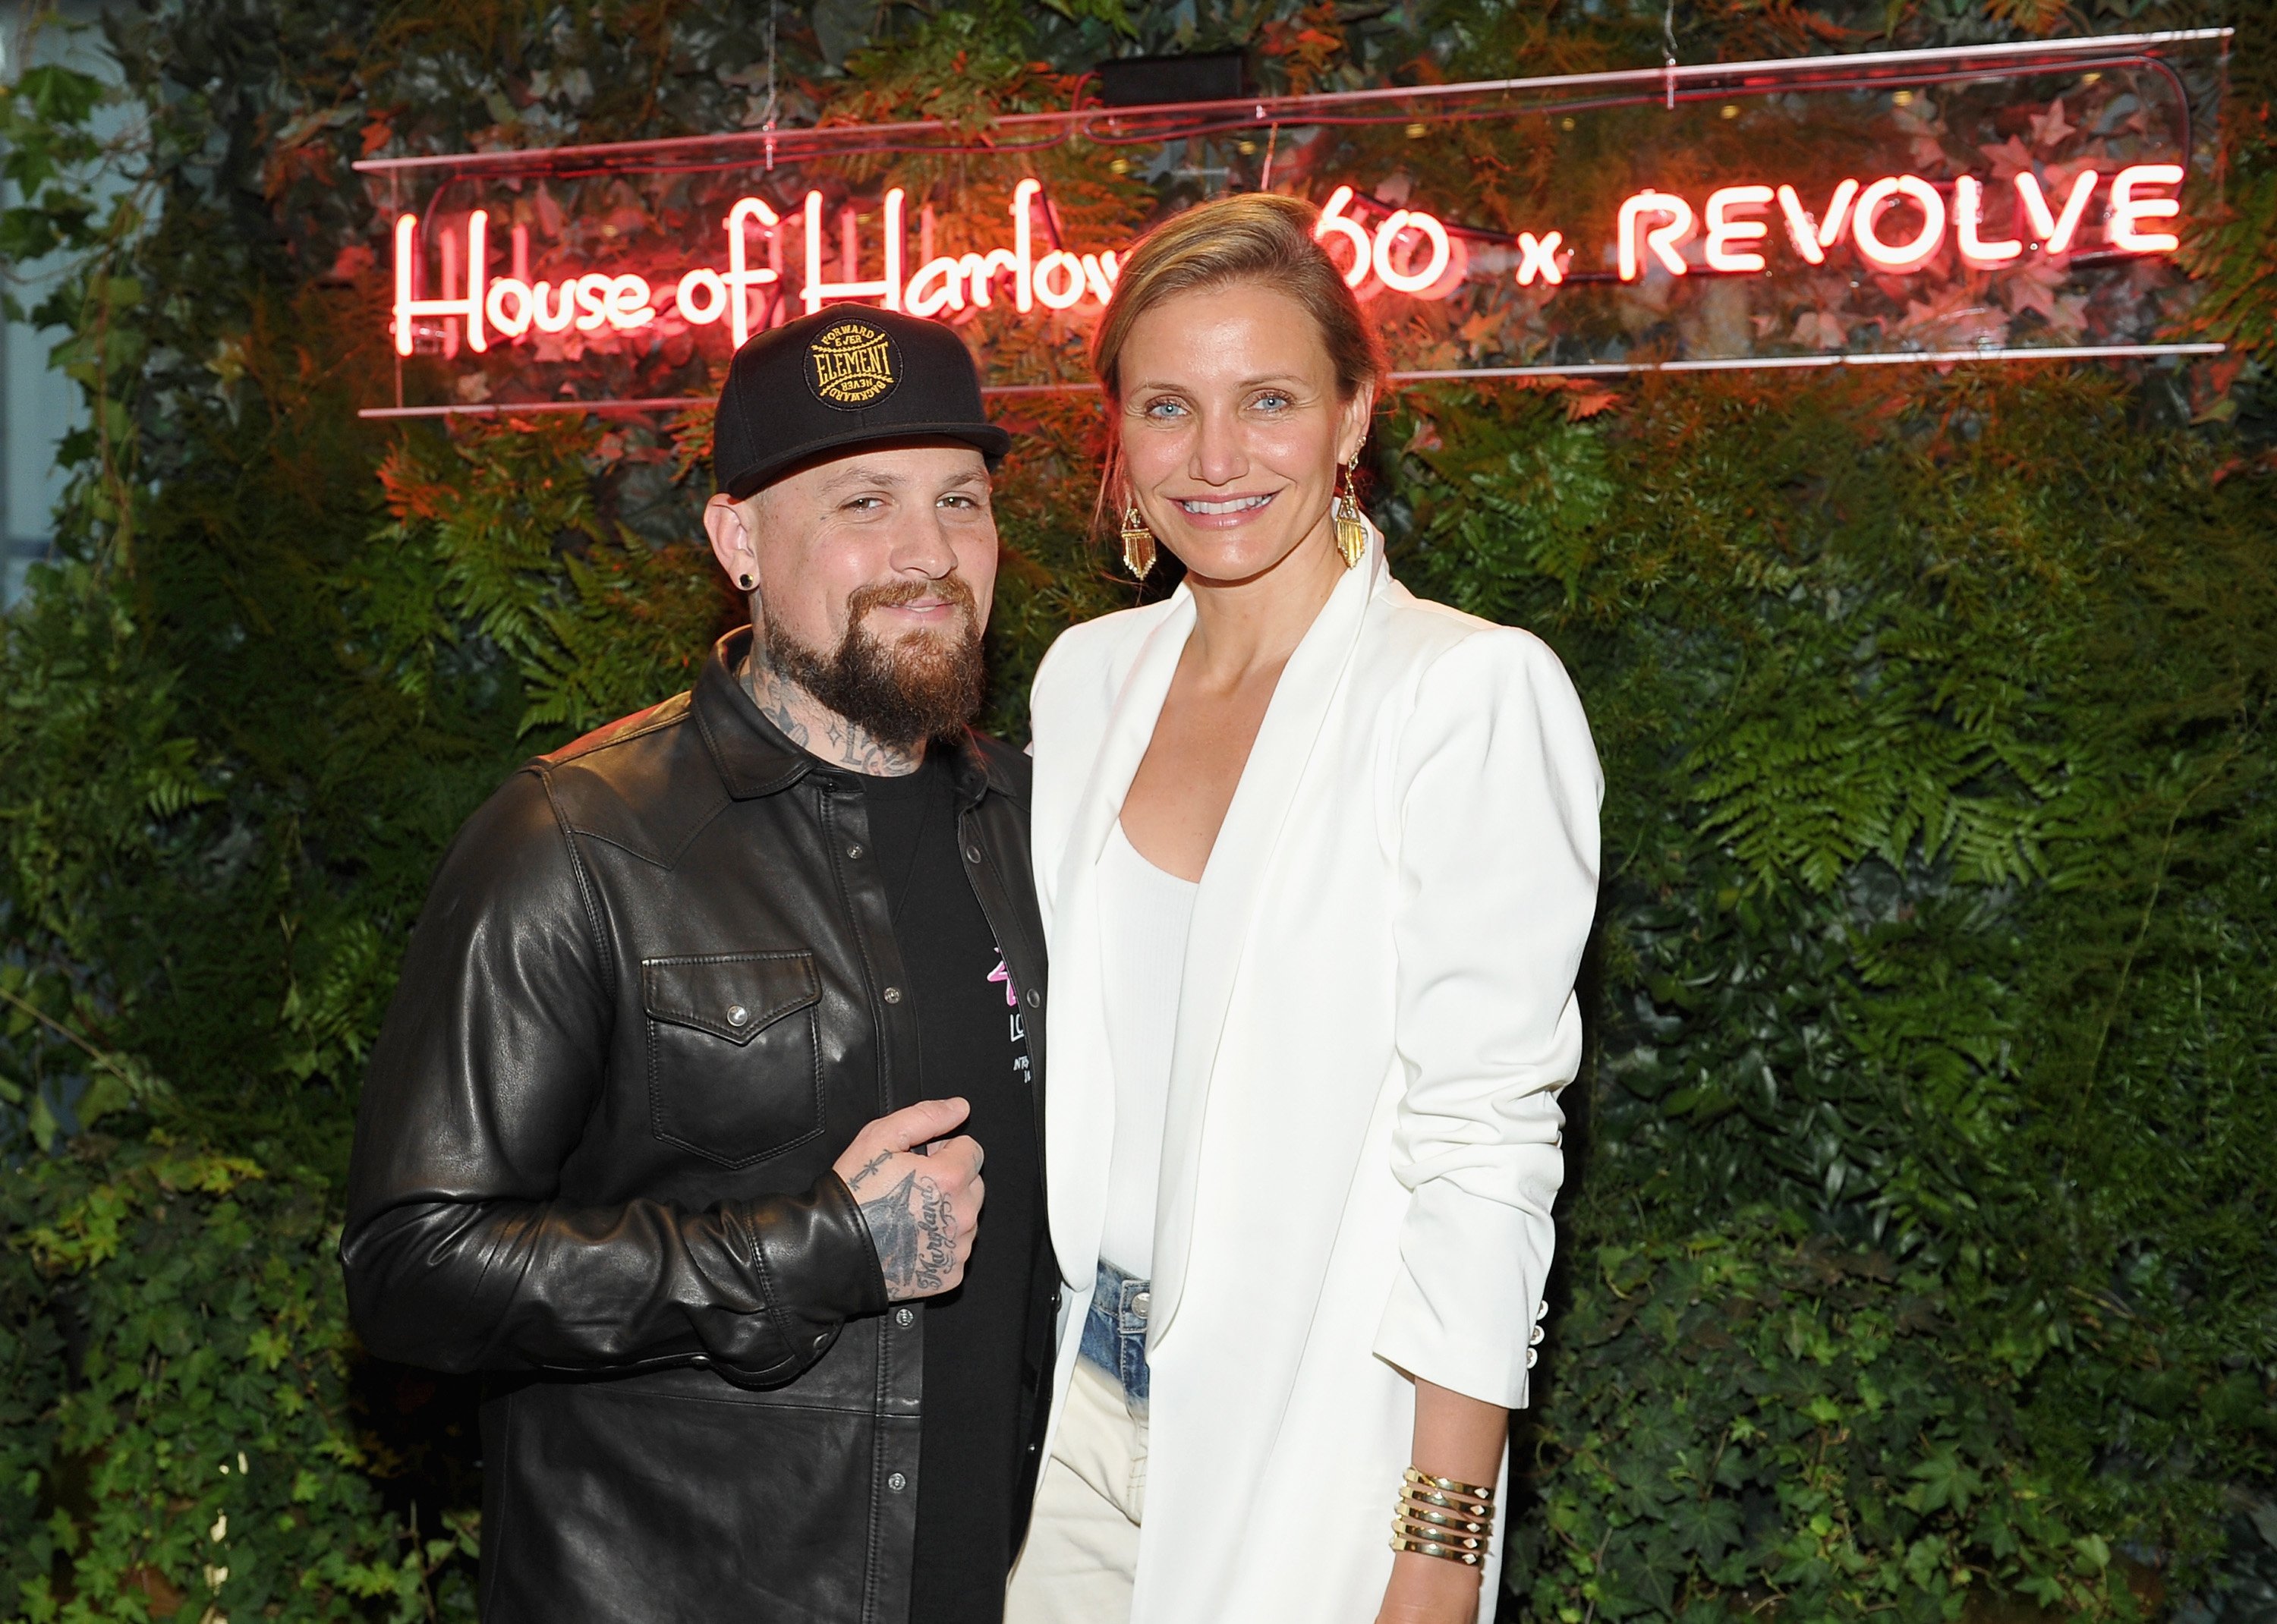 Benji Madden and Cameron Diaz attend House of Harlow 1960 x REVOLVE on June 2, 2016, in Los Angeles, California. | Photo: Getty Images